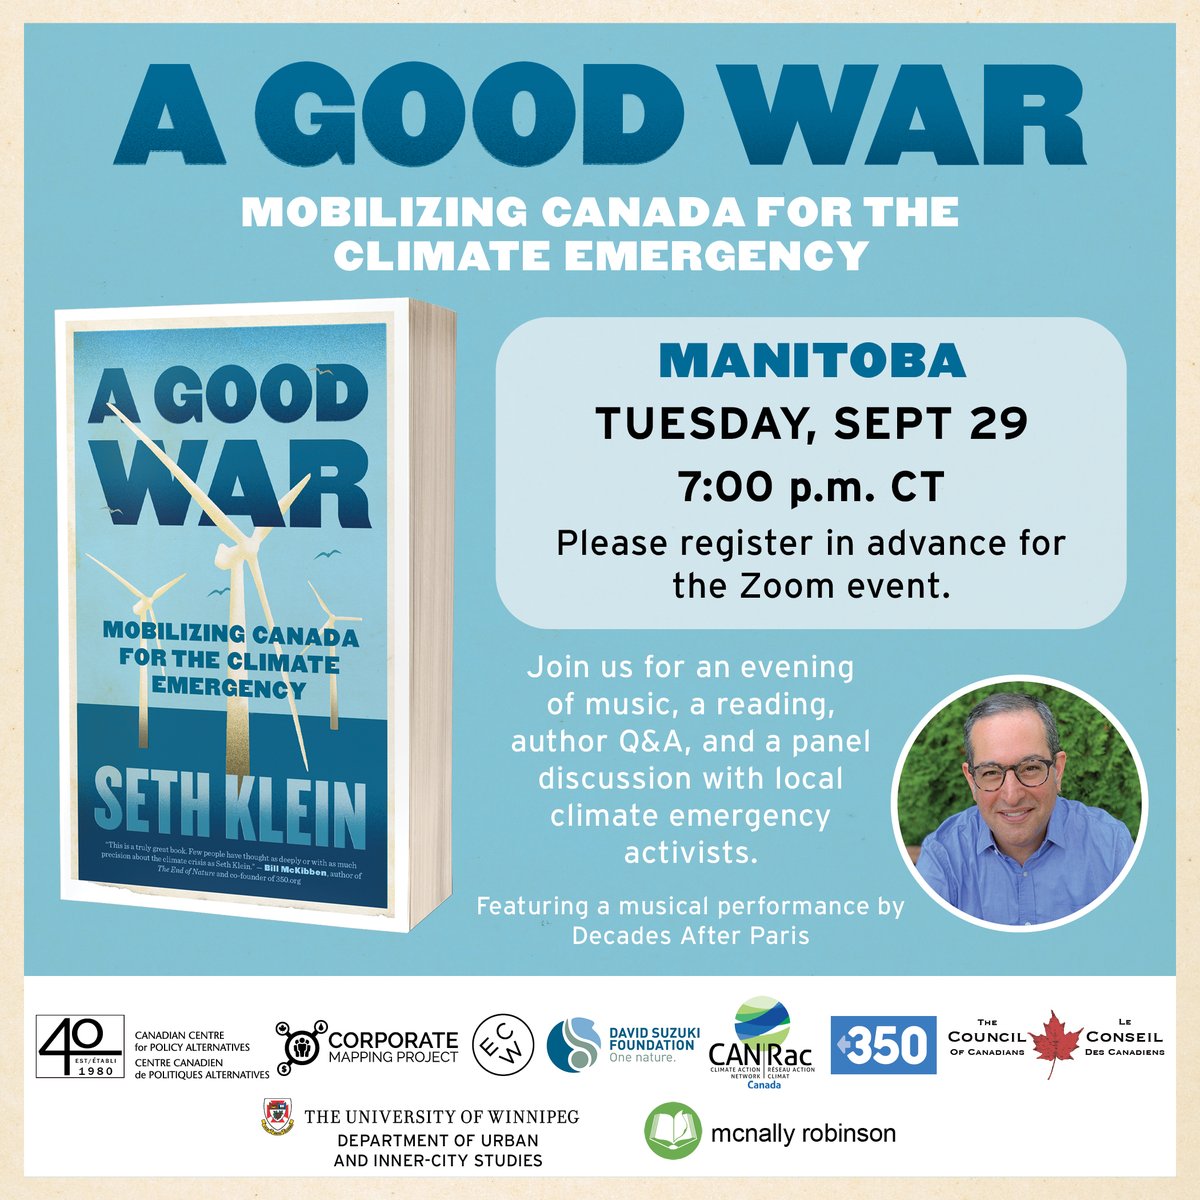 Sept 29 @ 7:00 is the Manitoba Book Launch, with musical guests  @DecadesAP and a great panel of local climate emergency activists. You can register here:  https://us02web.zoom.us/webinar/register/WN_8pFyGxrgStGNae3EcN2pnA